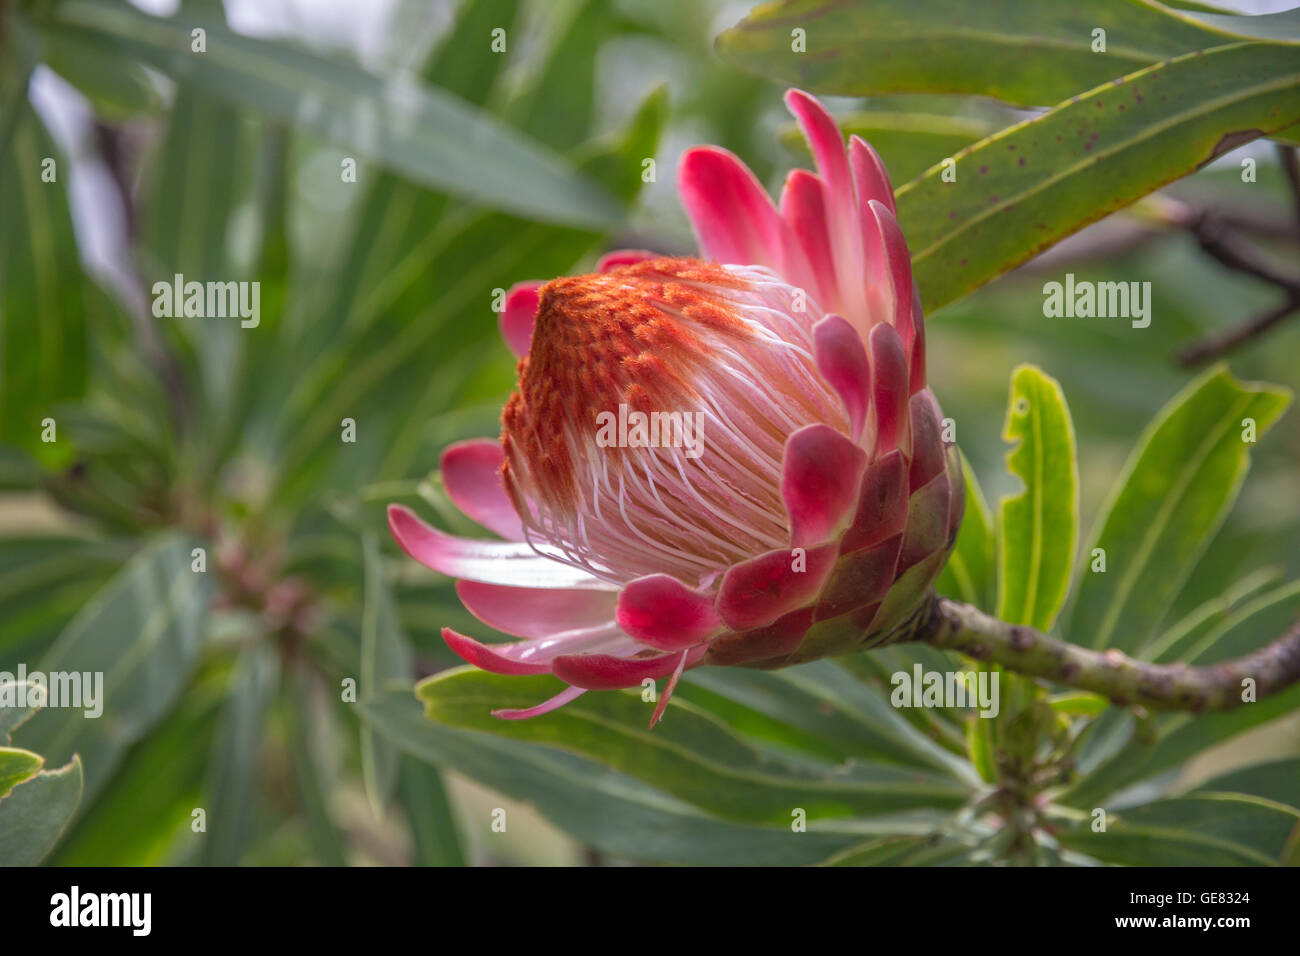 Gorgeous pink, red, orange and white Protea Flower against natural background of green foliage in the Drakensberg Mountains Stock Photo